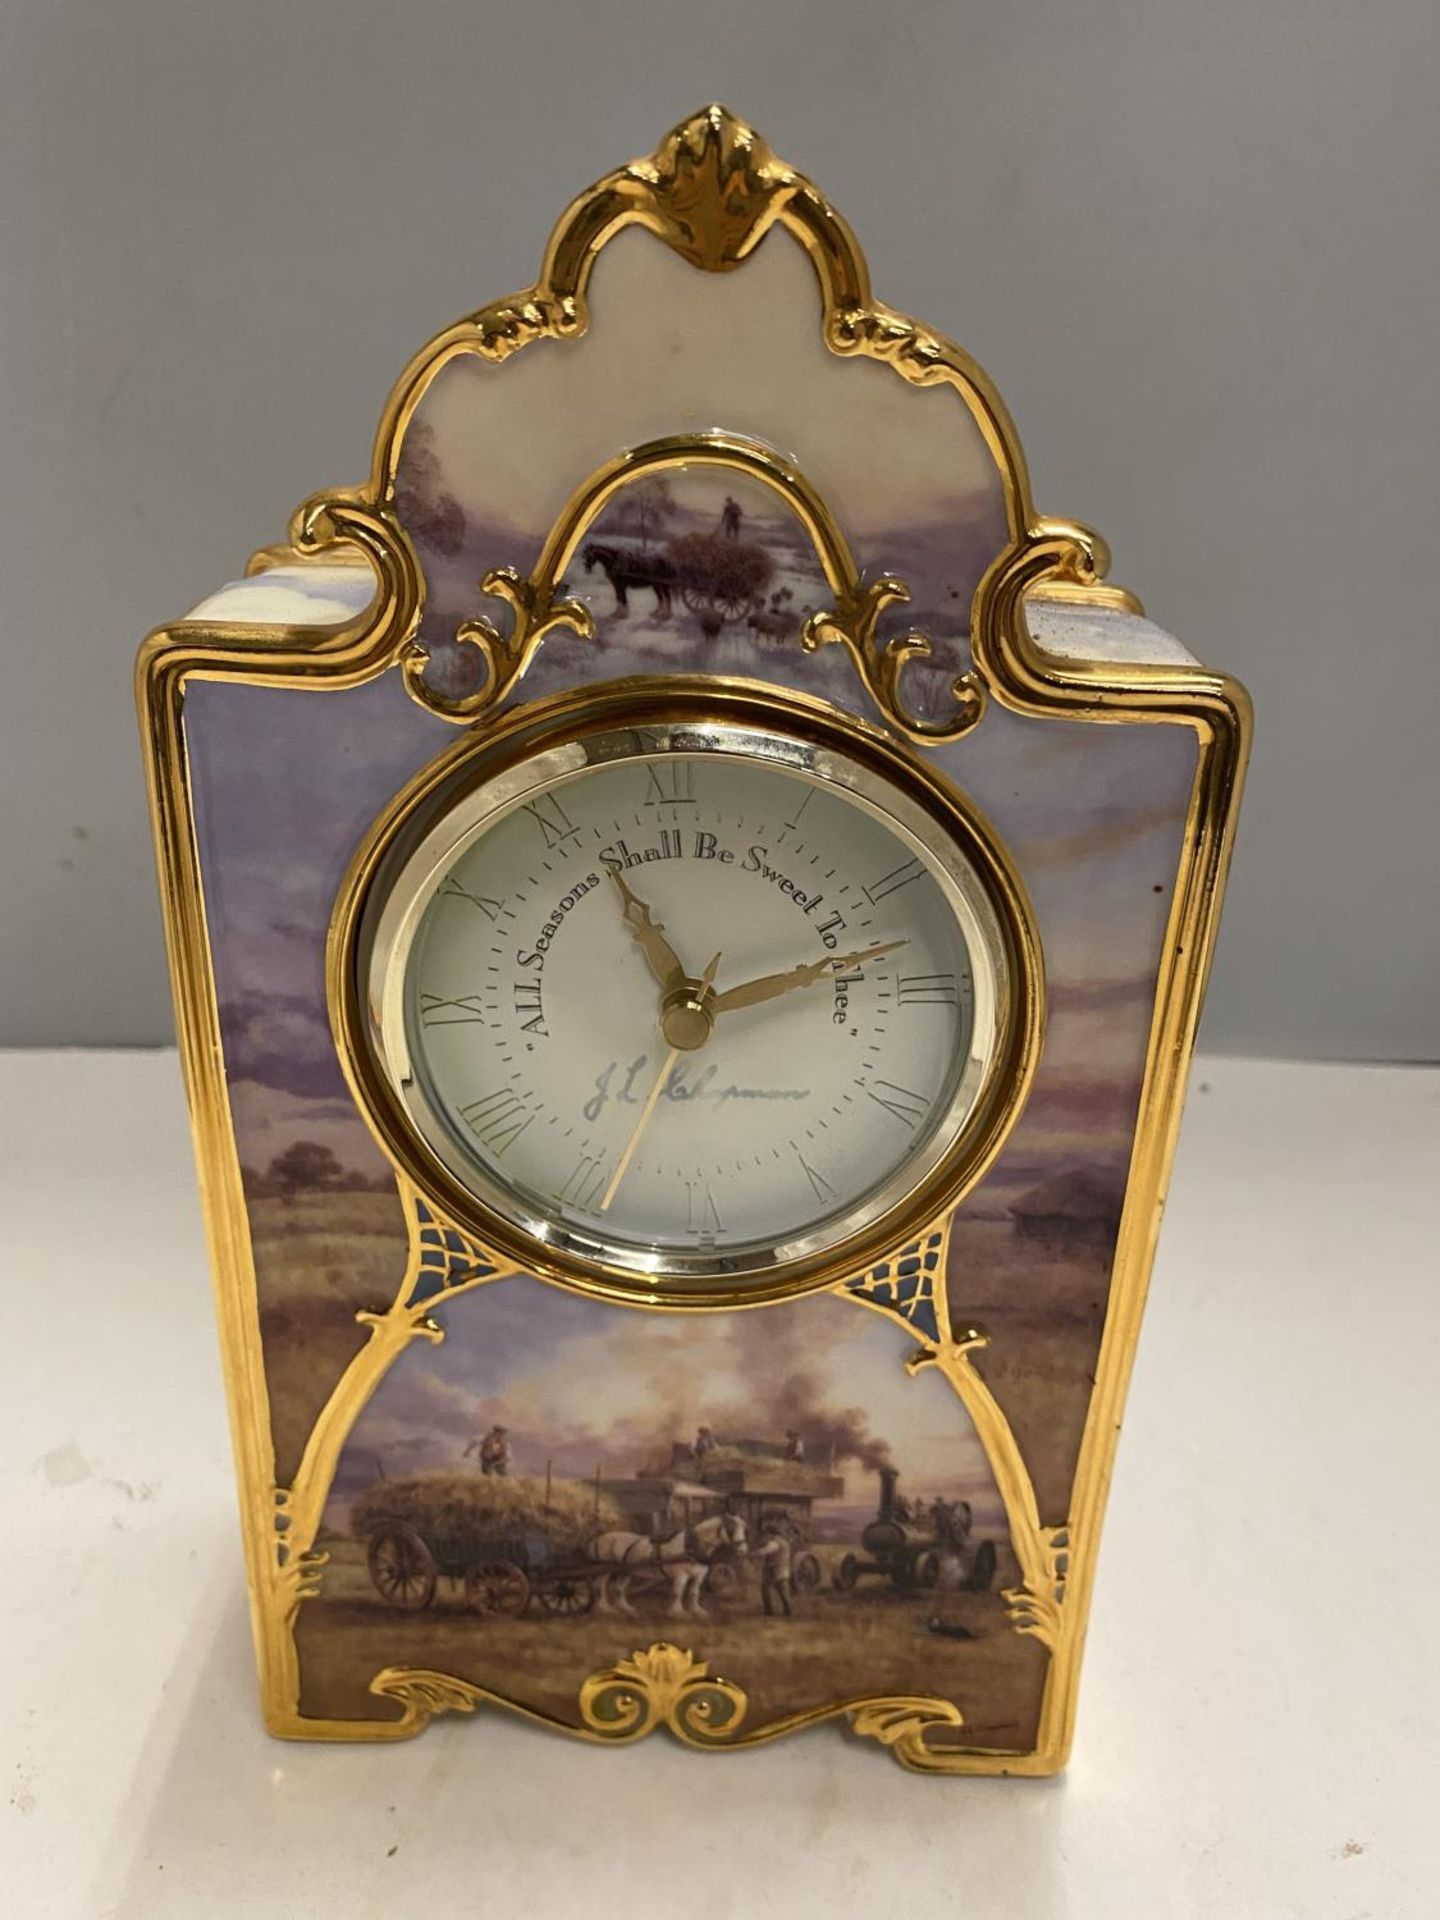 A HEIRLOOM PORCELAIN MANTLE CLOCK WITH PAINTED SHIRE HORSE AND COUNTRY SCENES